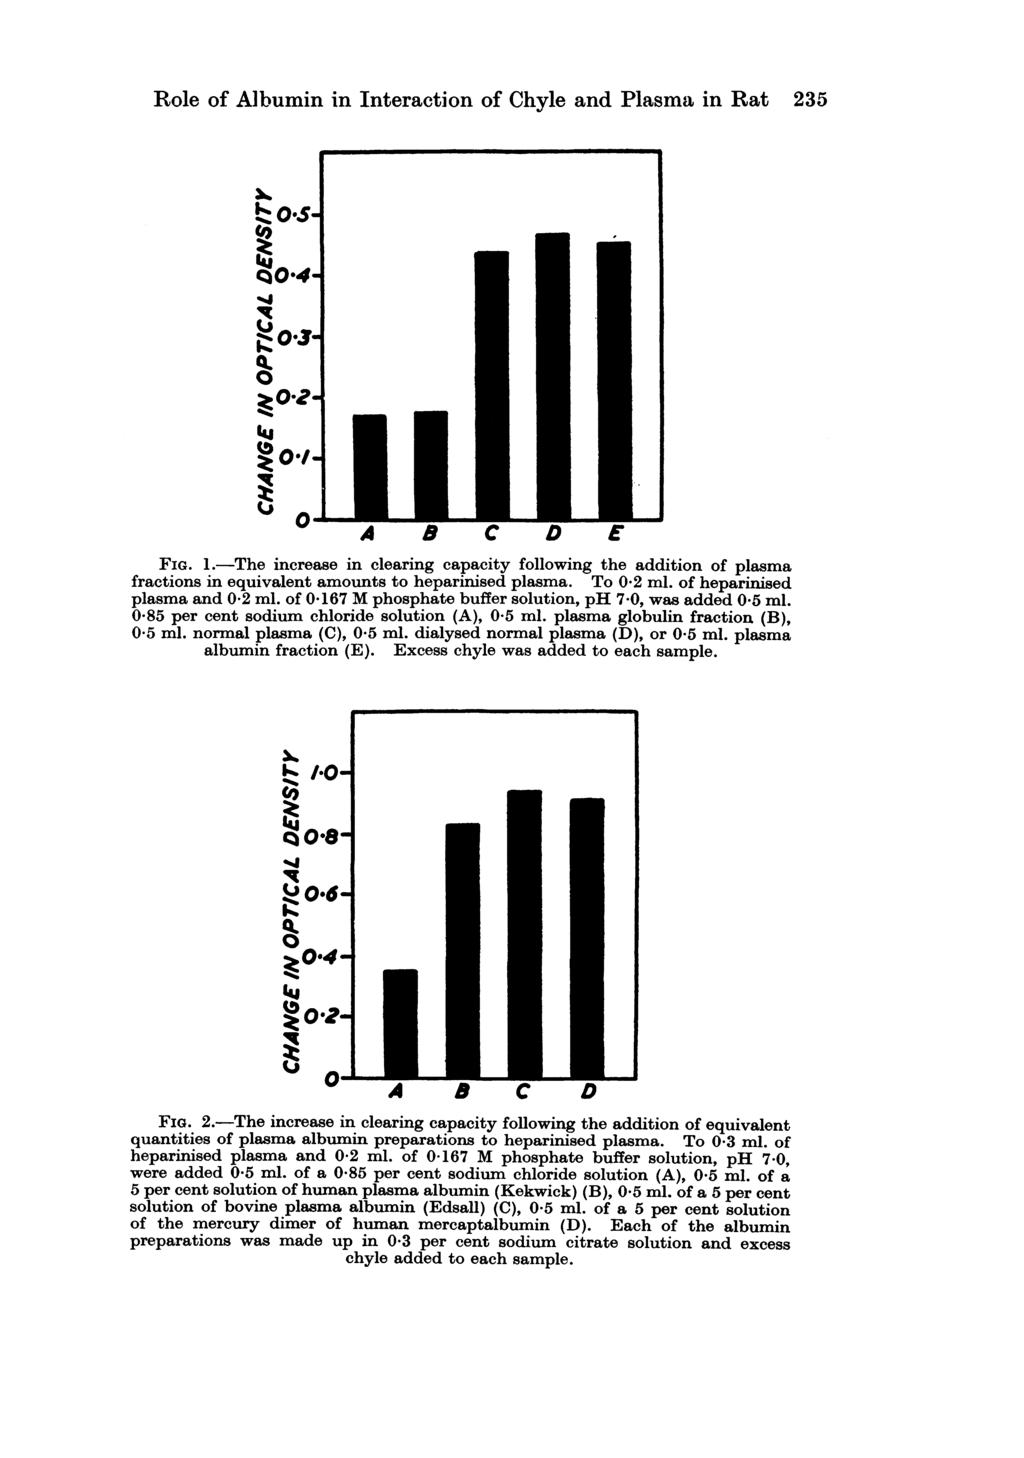 Role of Albumin in Interaction of Chyle and Plasma in Rat 235 FIG. 1.-The increase in clearing capacity following the addition of plasma fractions in equivalent amounts to heparinised plasma.